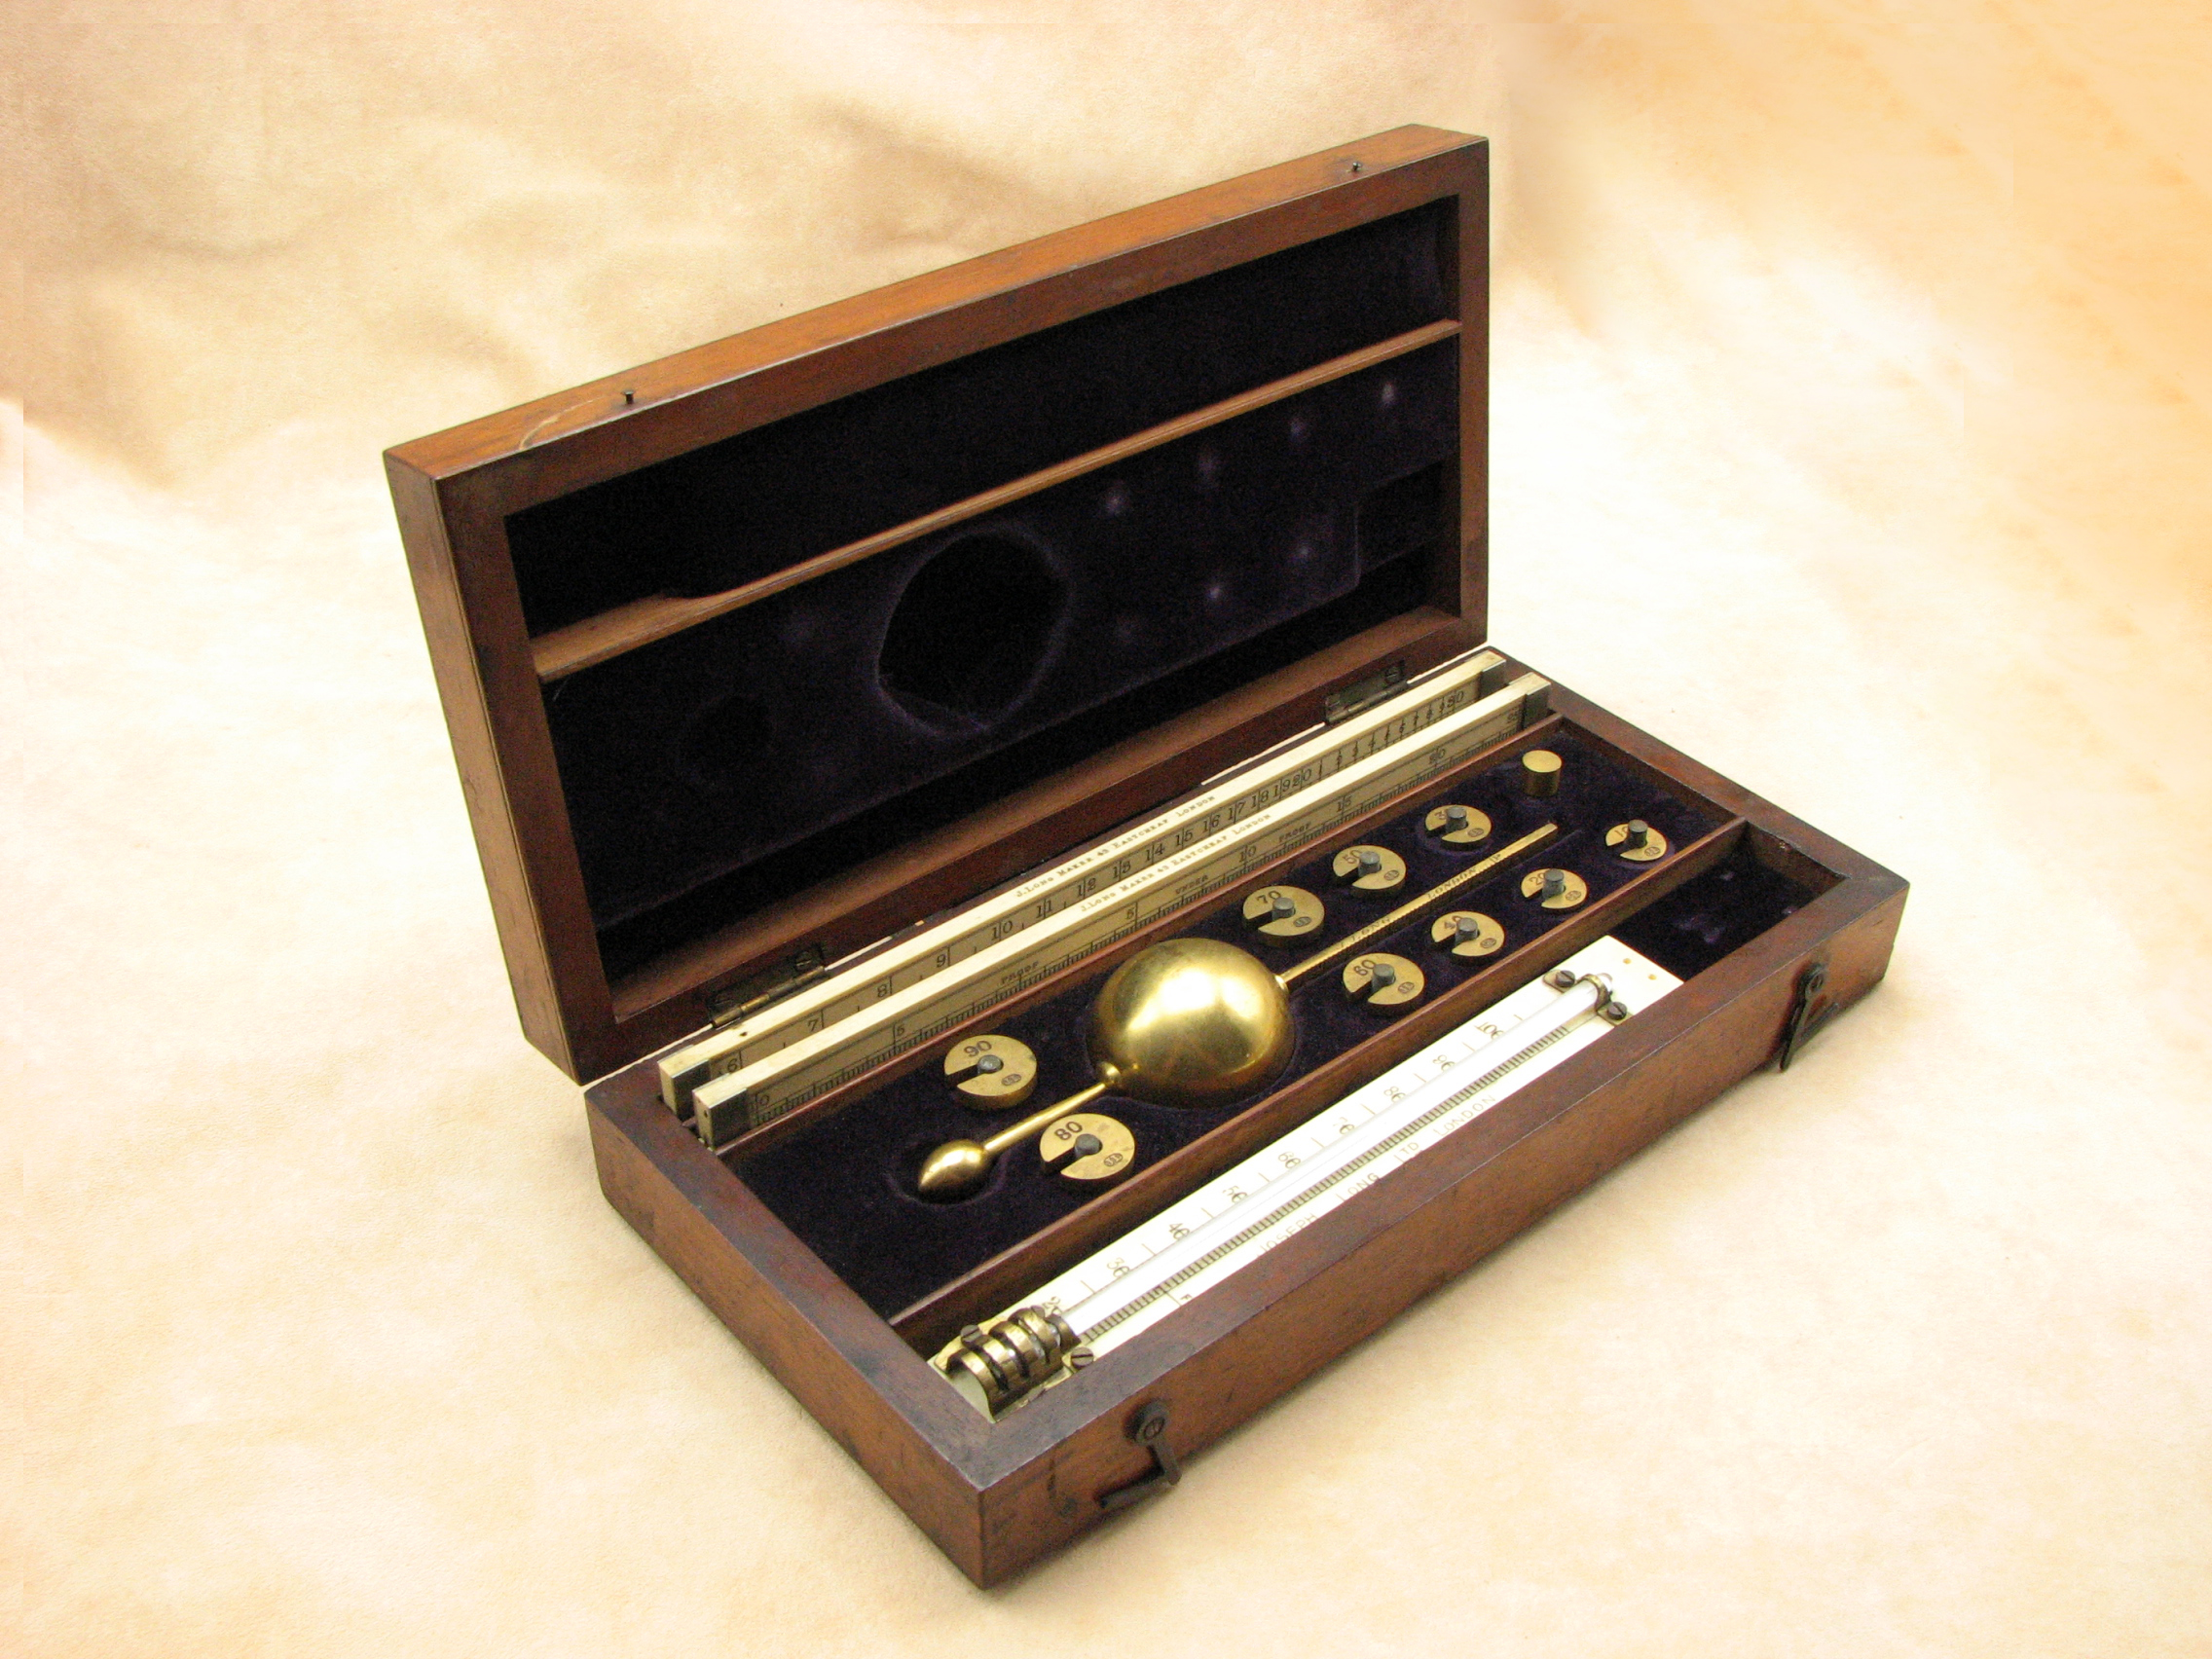 Exceptional 19th century Sikes Hydrometer set by Joseph Long, 43 Eastcheap